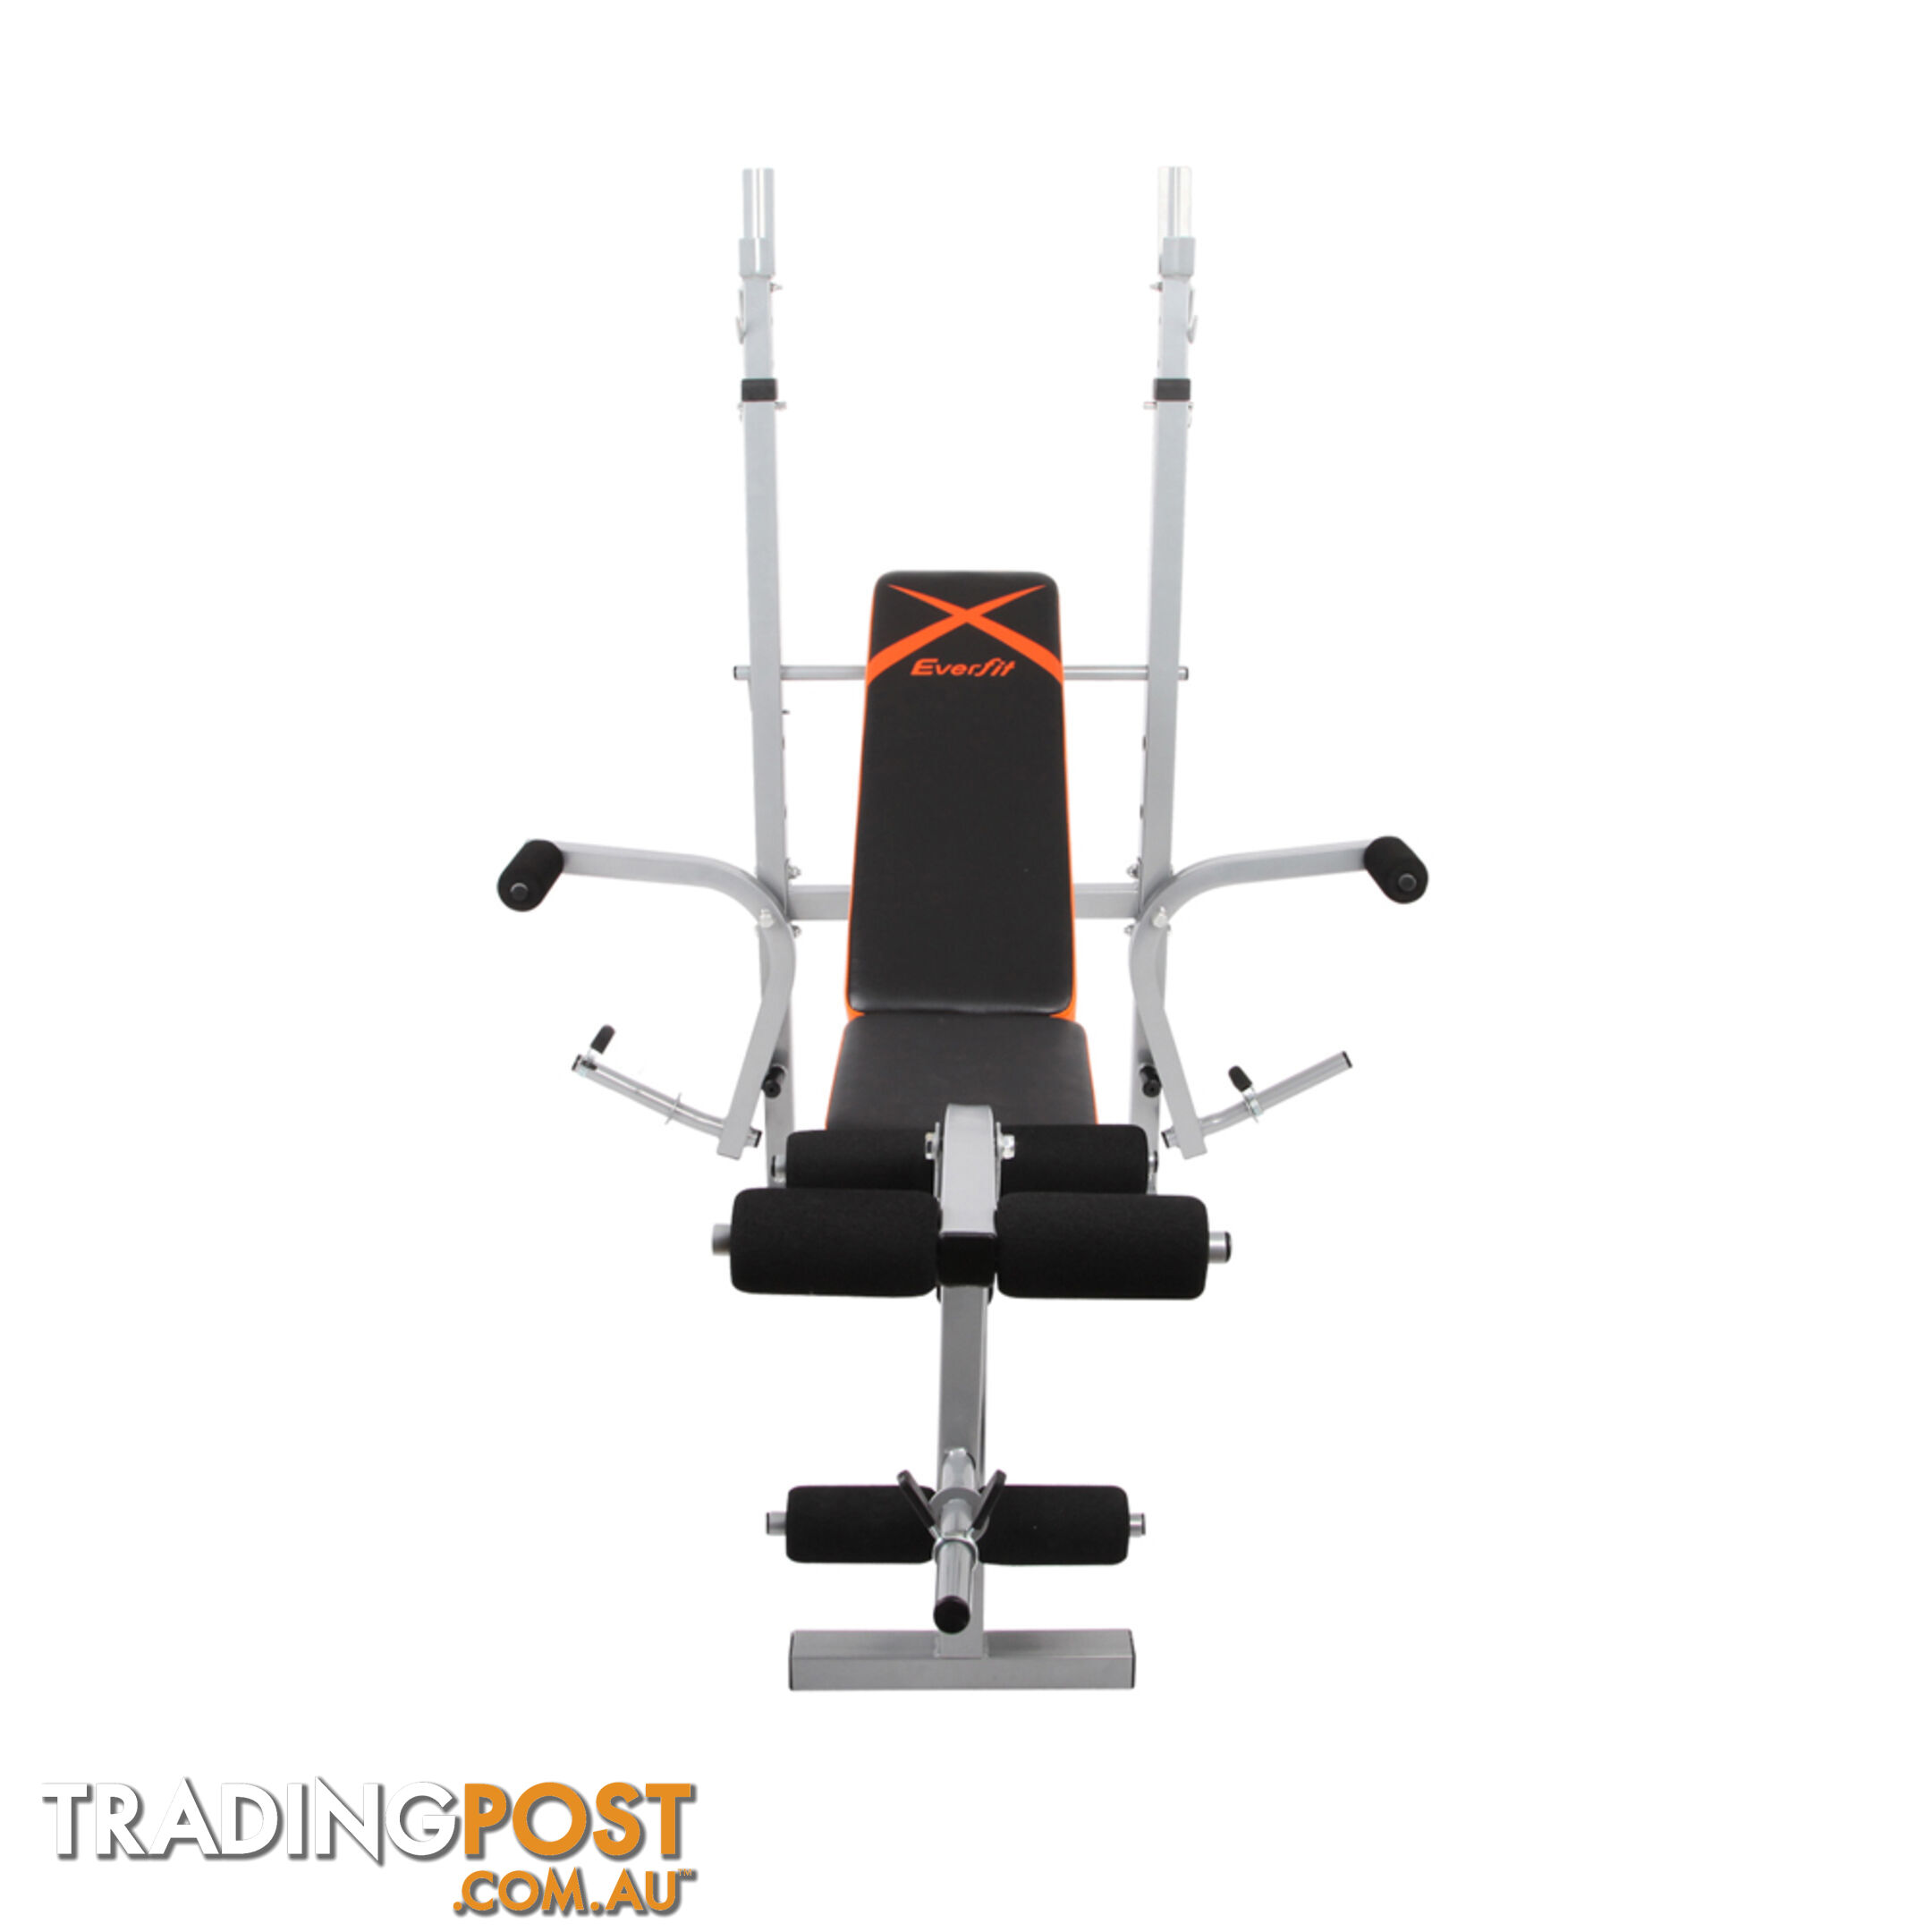 Adjustable Home Gym Multi-Station Weights Bench